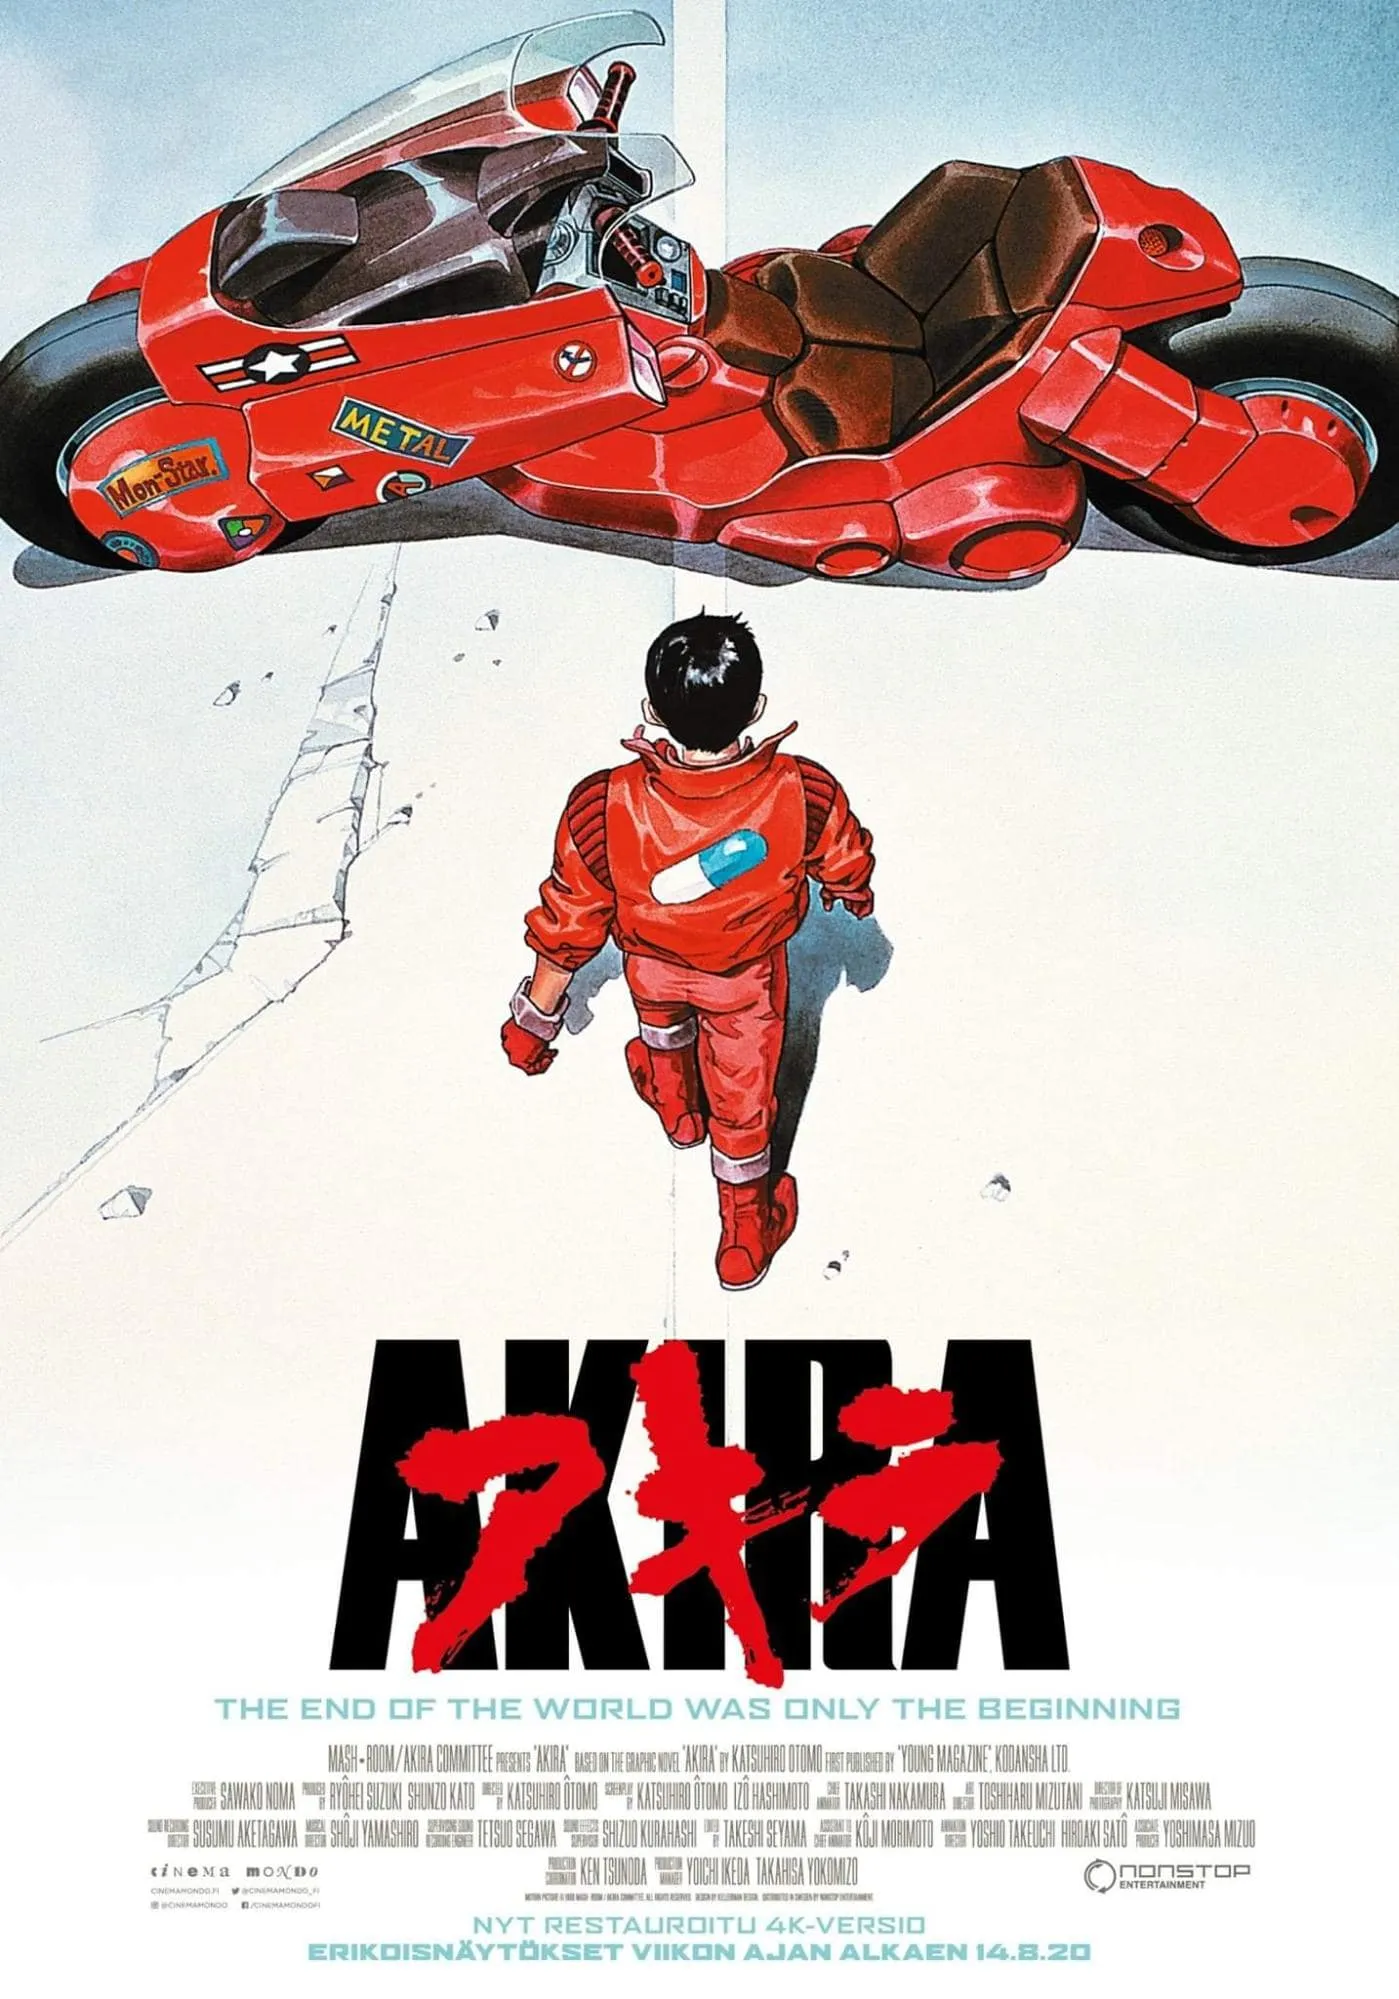 Akira (1998), the movie that probably inspired the ransomware group, popular culture is a widely common reference point among the threat actors especially since these kinds of cultural products grow in cyberspace -the internet. (Image: IMDb)